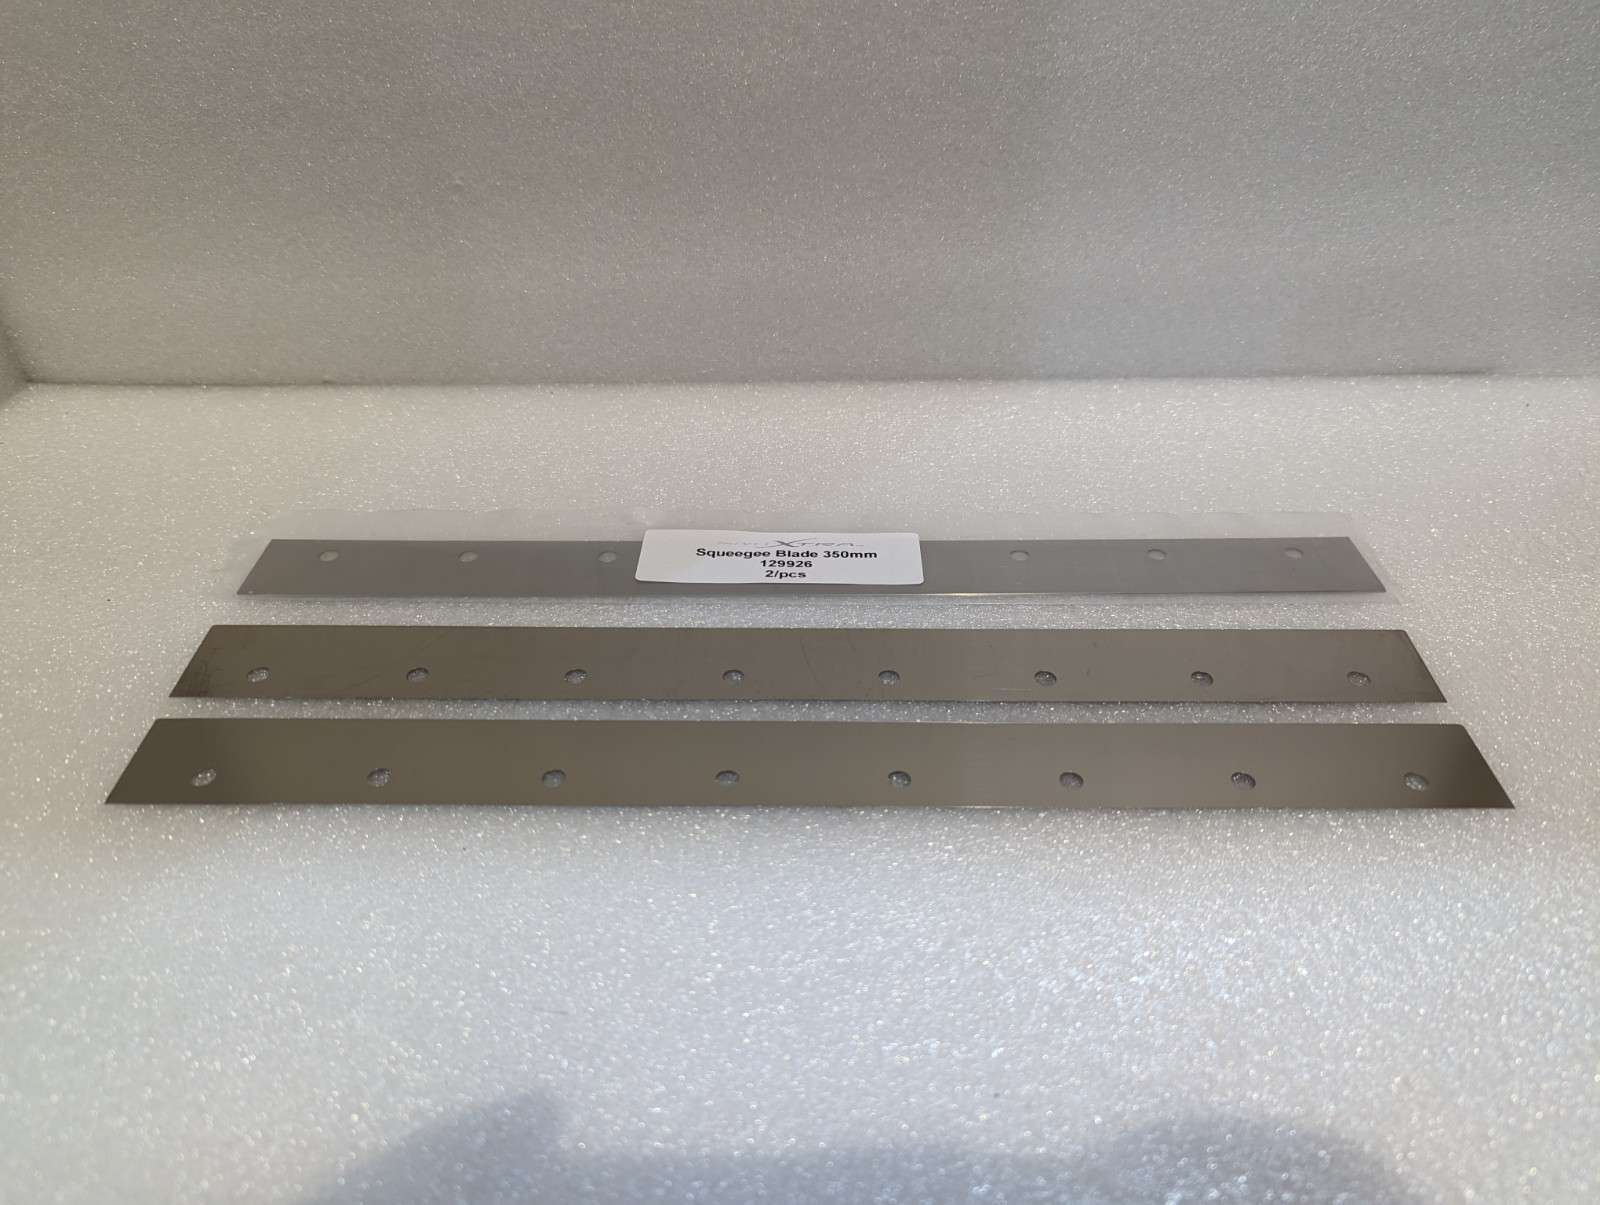 Squeegee blade 350mm (1)